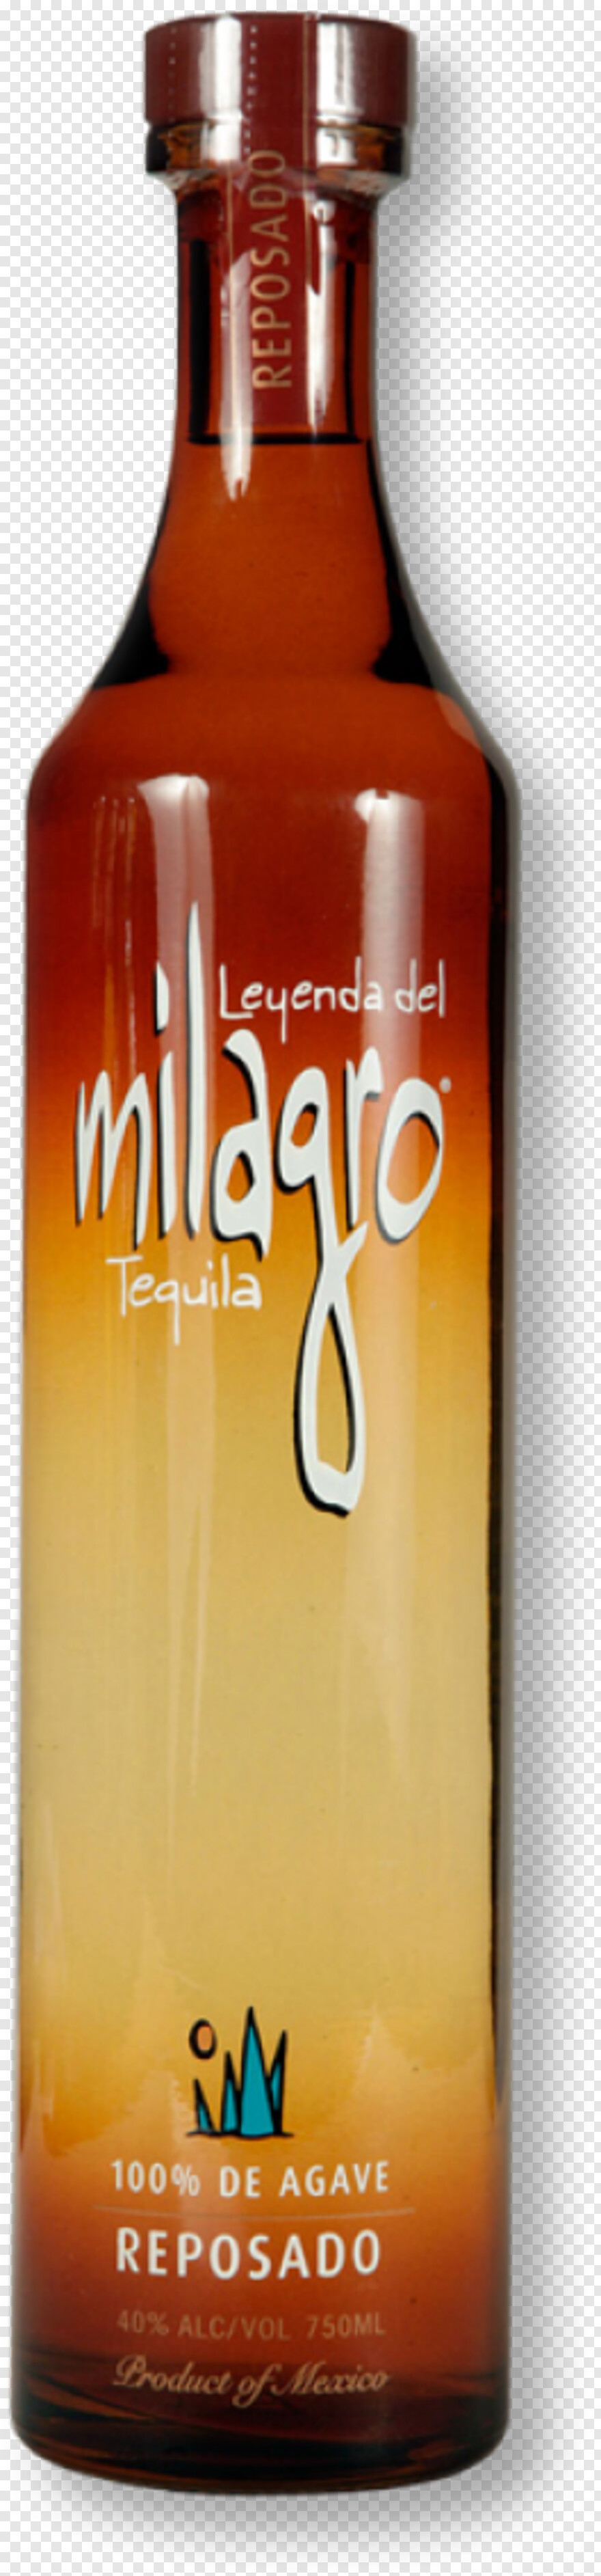 tequila # 324556